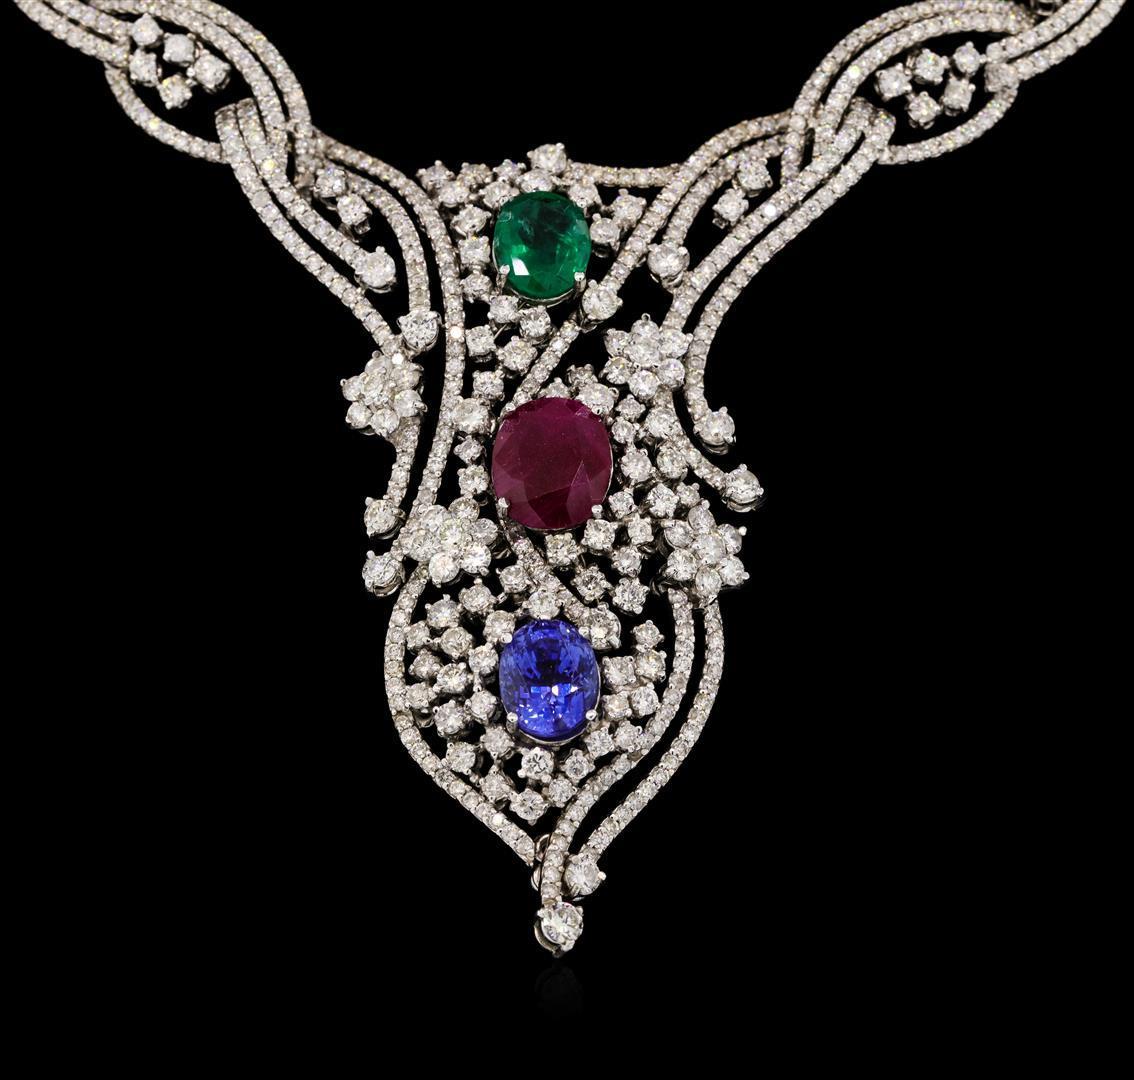 11.56 ctw Ruby, Sapphire, Emerald and Diamond Necklace - 14KT White Gold